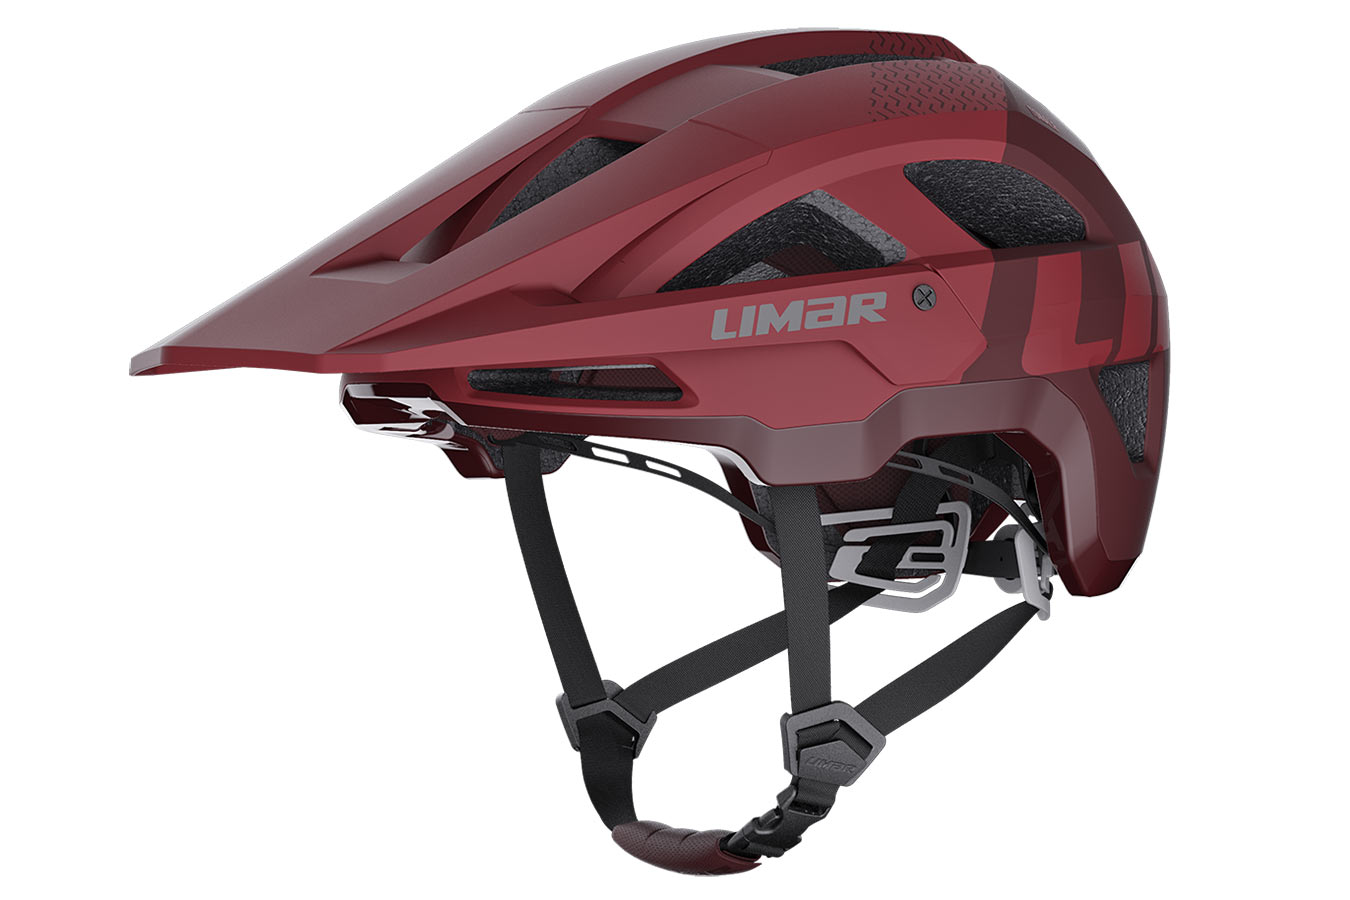 Limar Tonale affordable all-mountain bike helmet, red angled